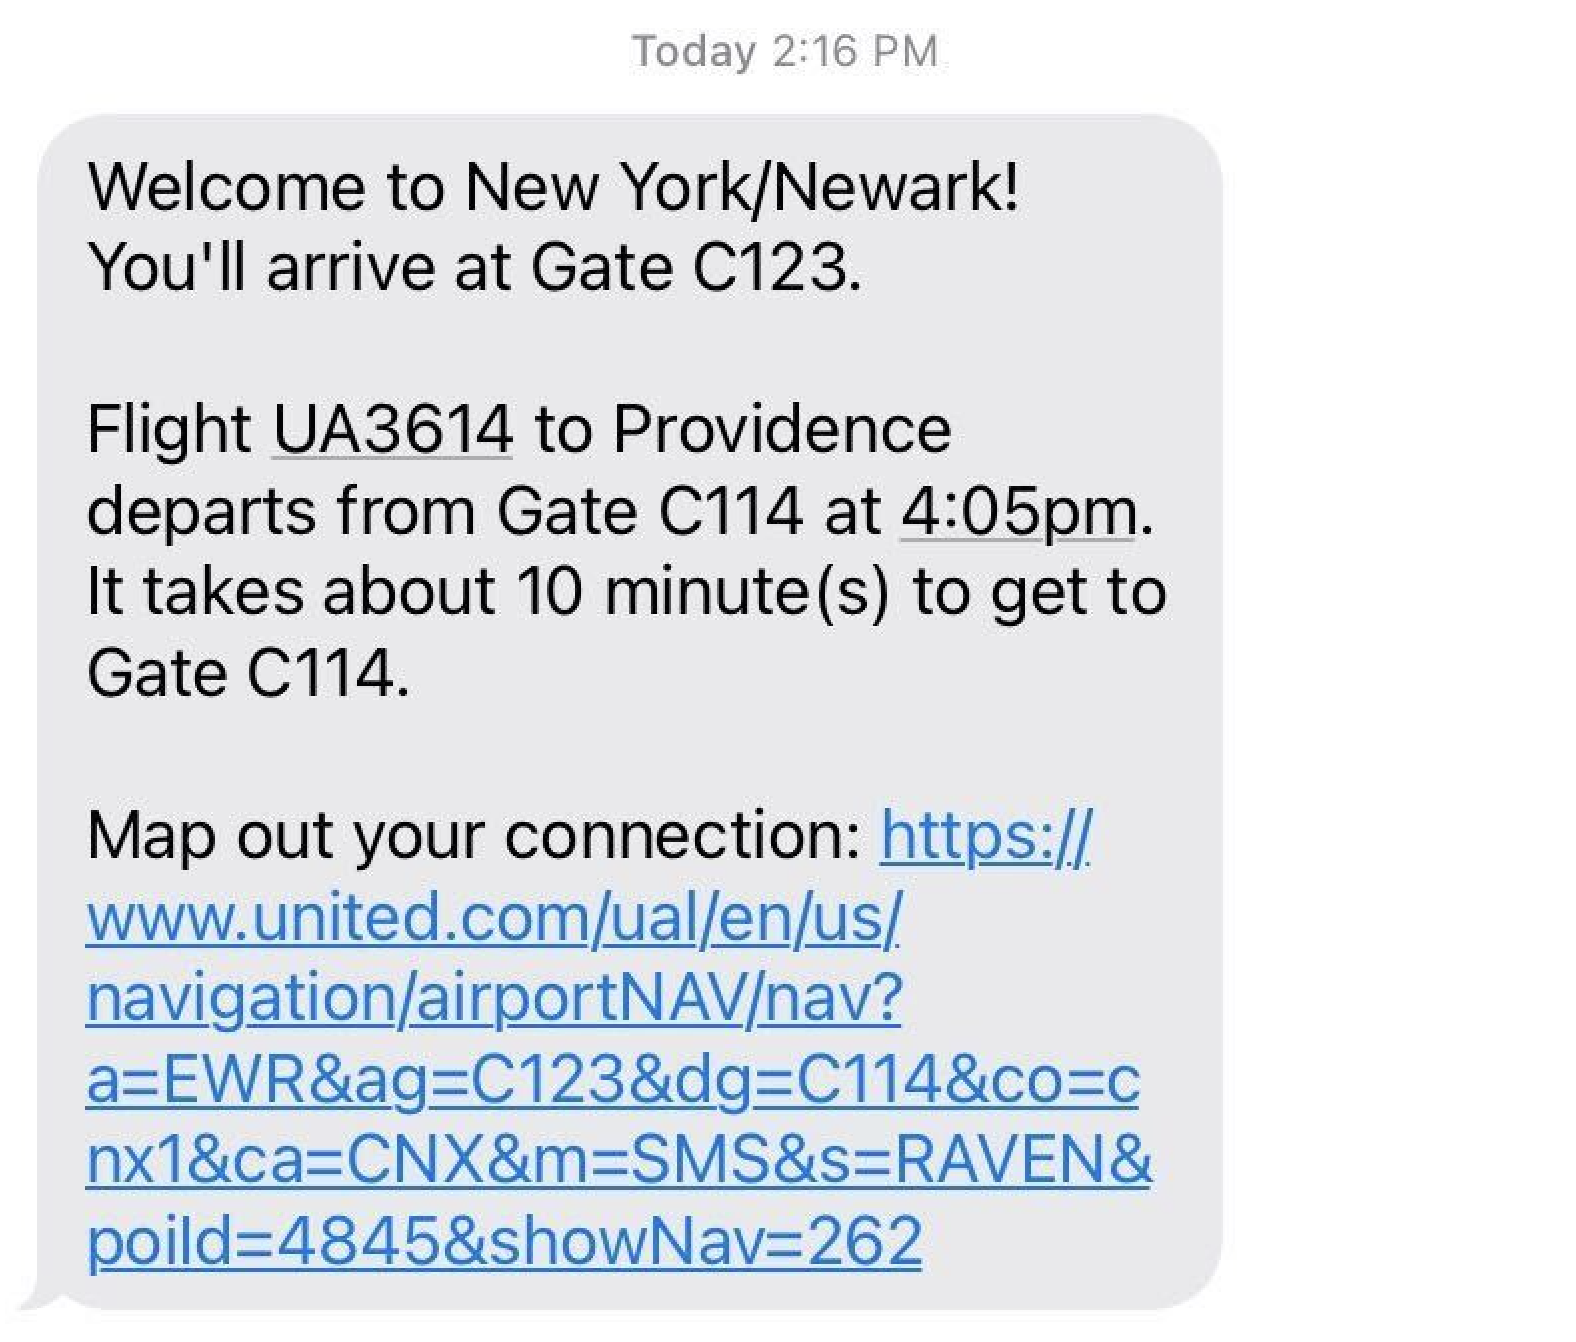 United Airlines Personalized SMS Message